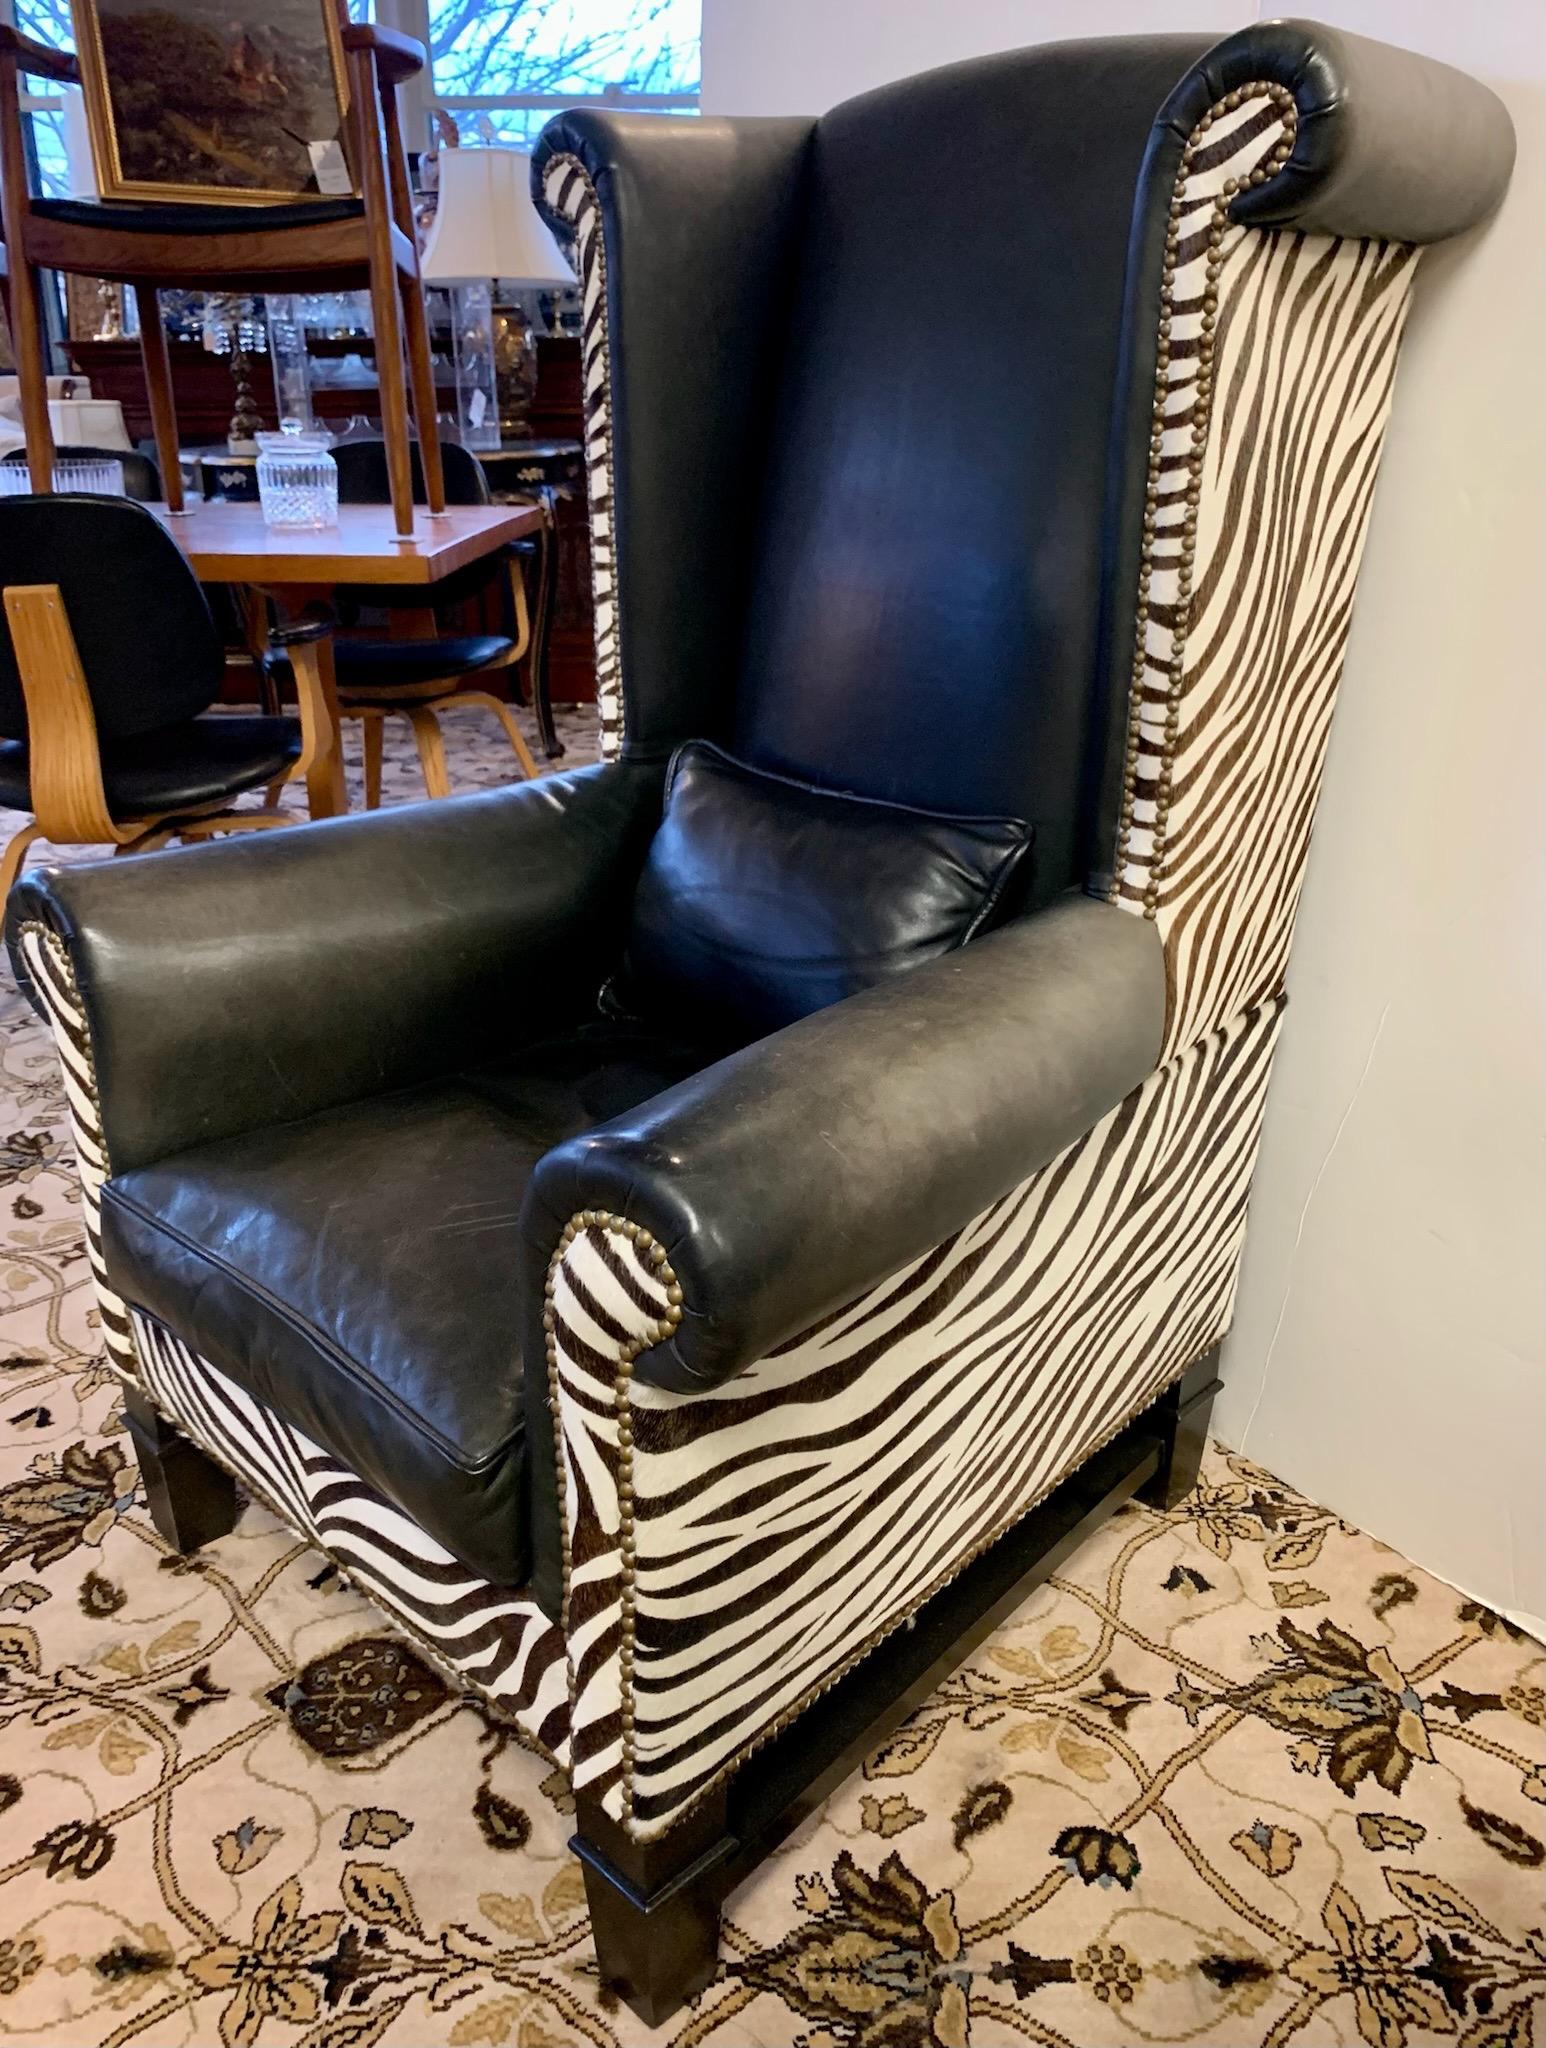 Handsome and very tall custom upholstered modern wingback chair in zebra print cowhide on side, back and front. High quality black leather fabric at from and on arms. Accented with brass nailheads all around. There is some fading in the leather in